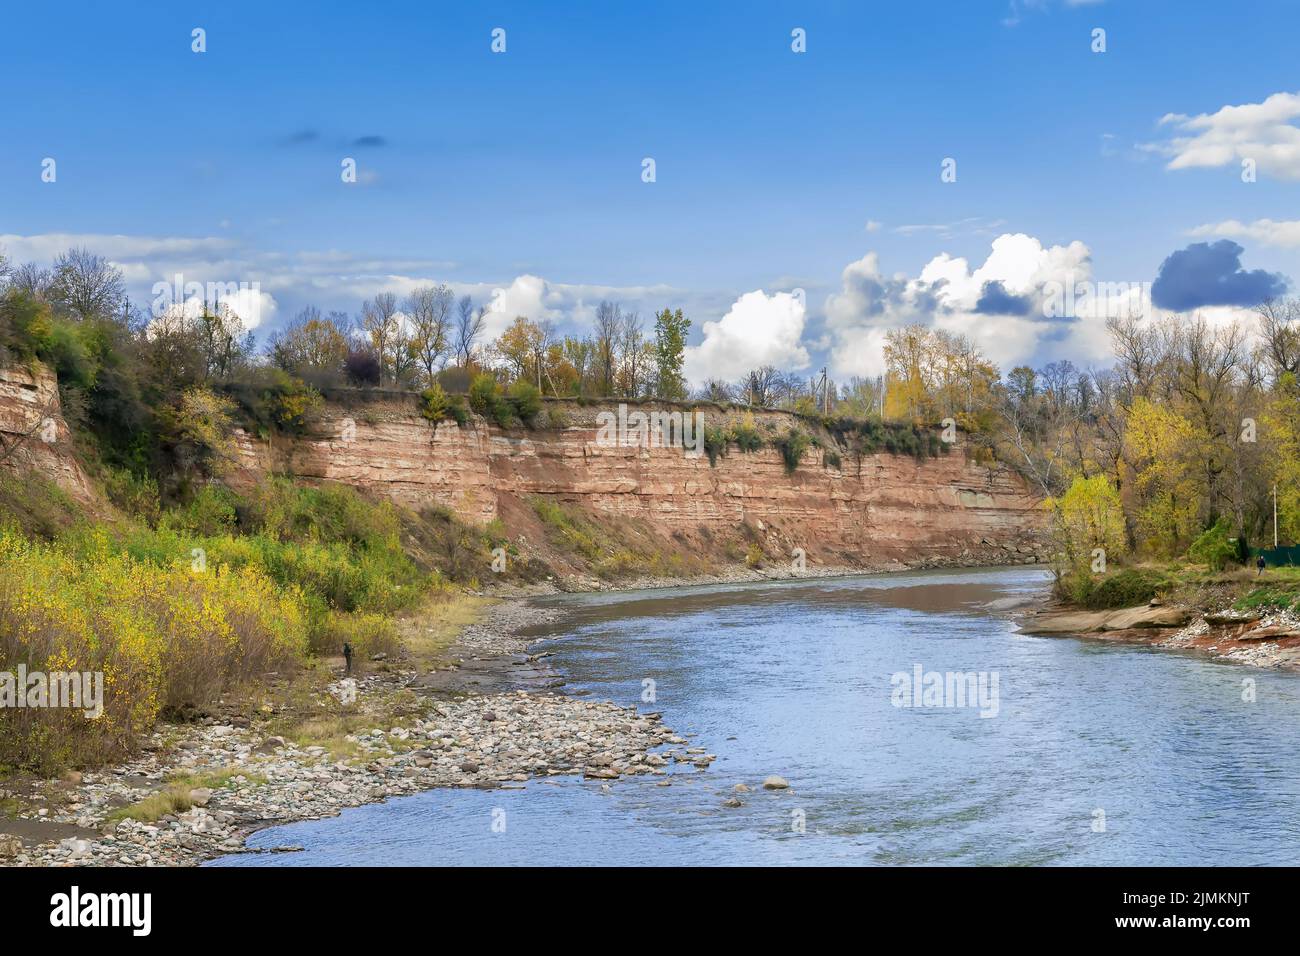 Landscape with the river Belaya, Adygea, Russia Stock Photo